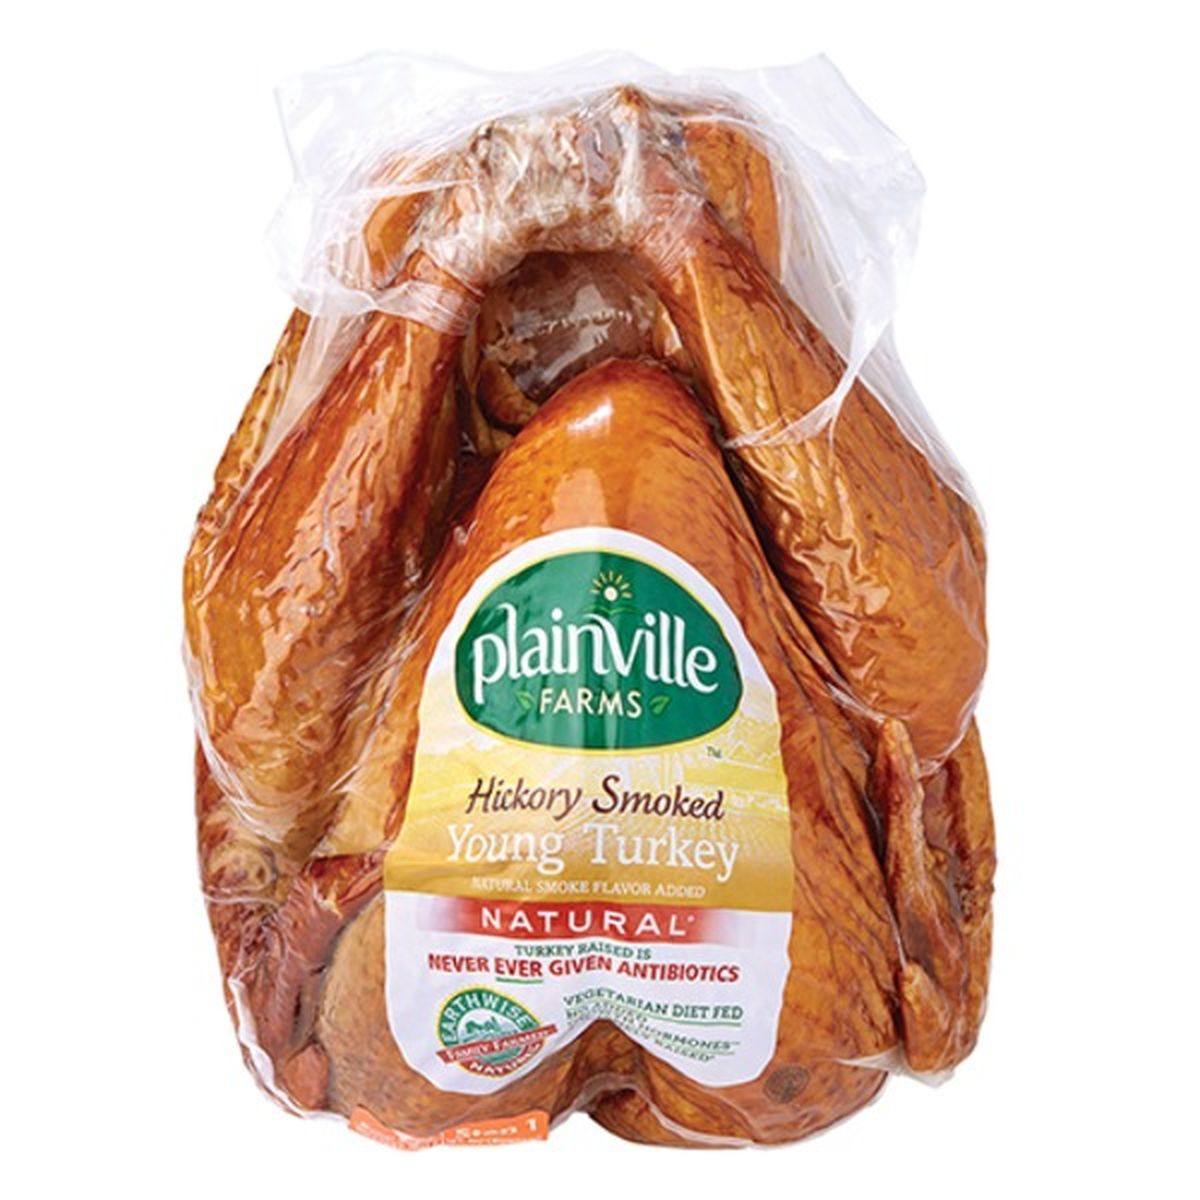 Calories in Plainville Farms Hickory Smoked Young Turkey